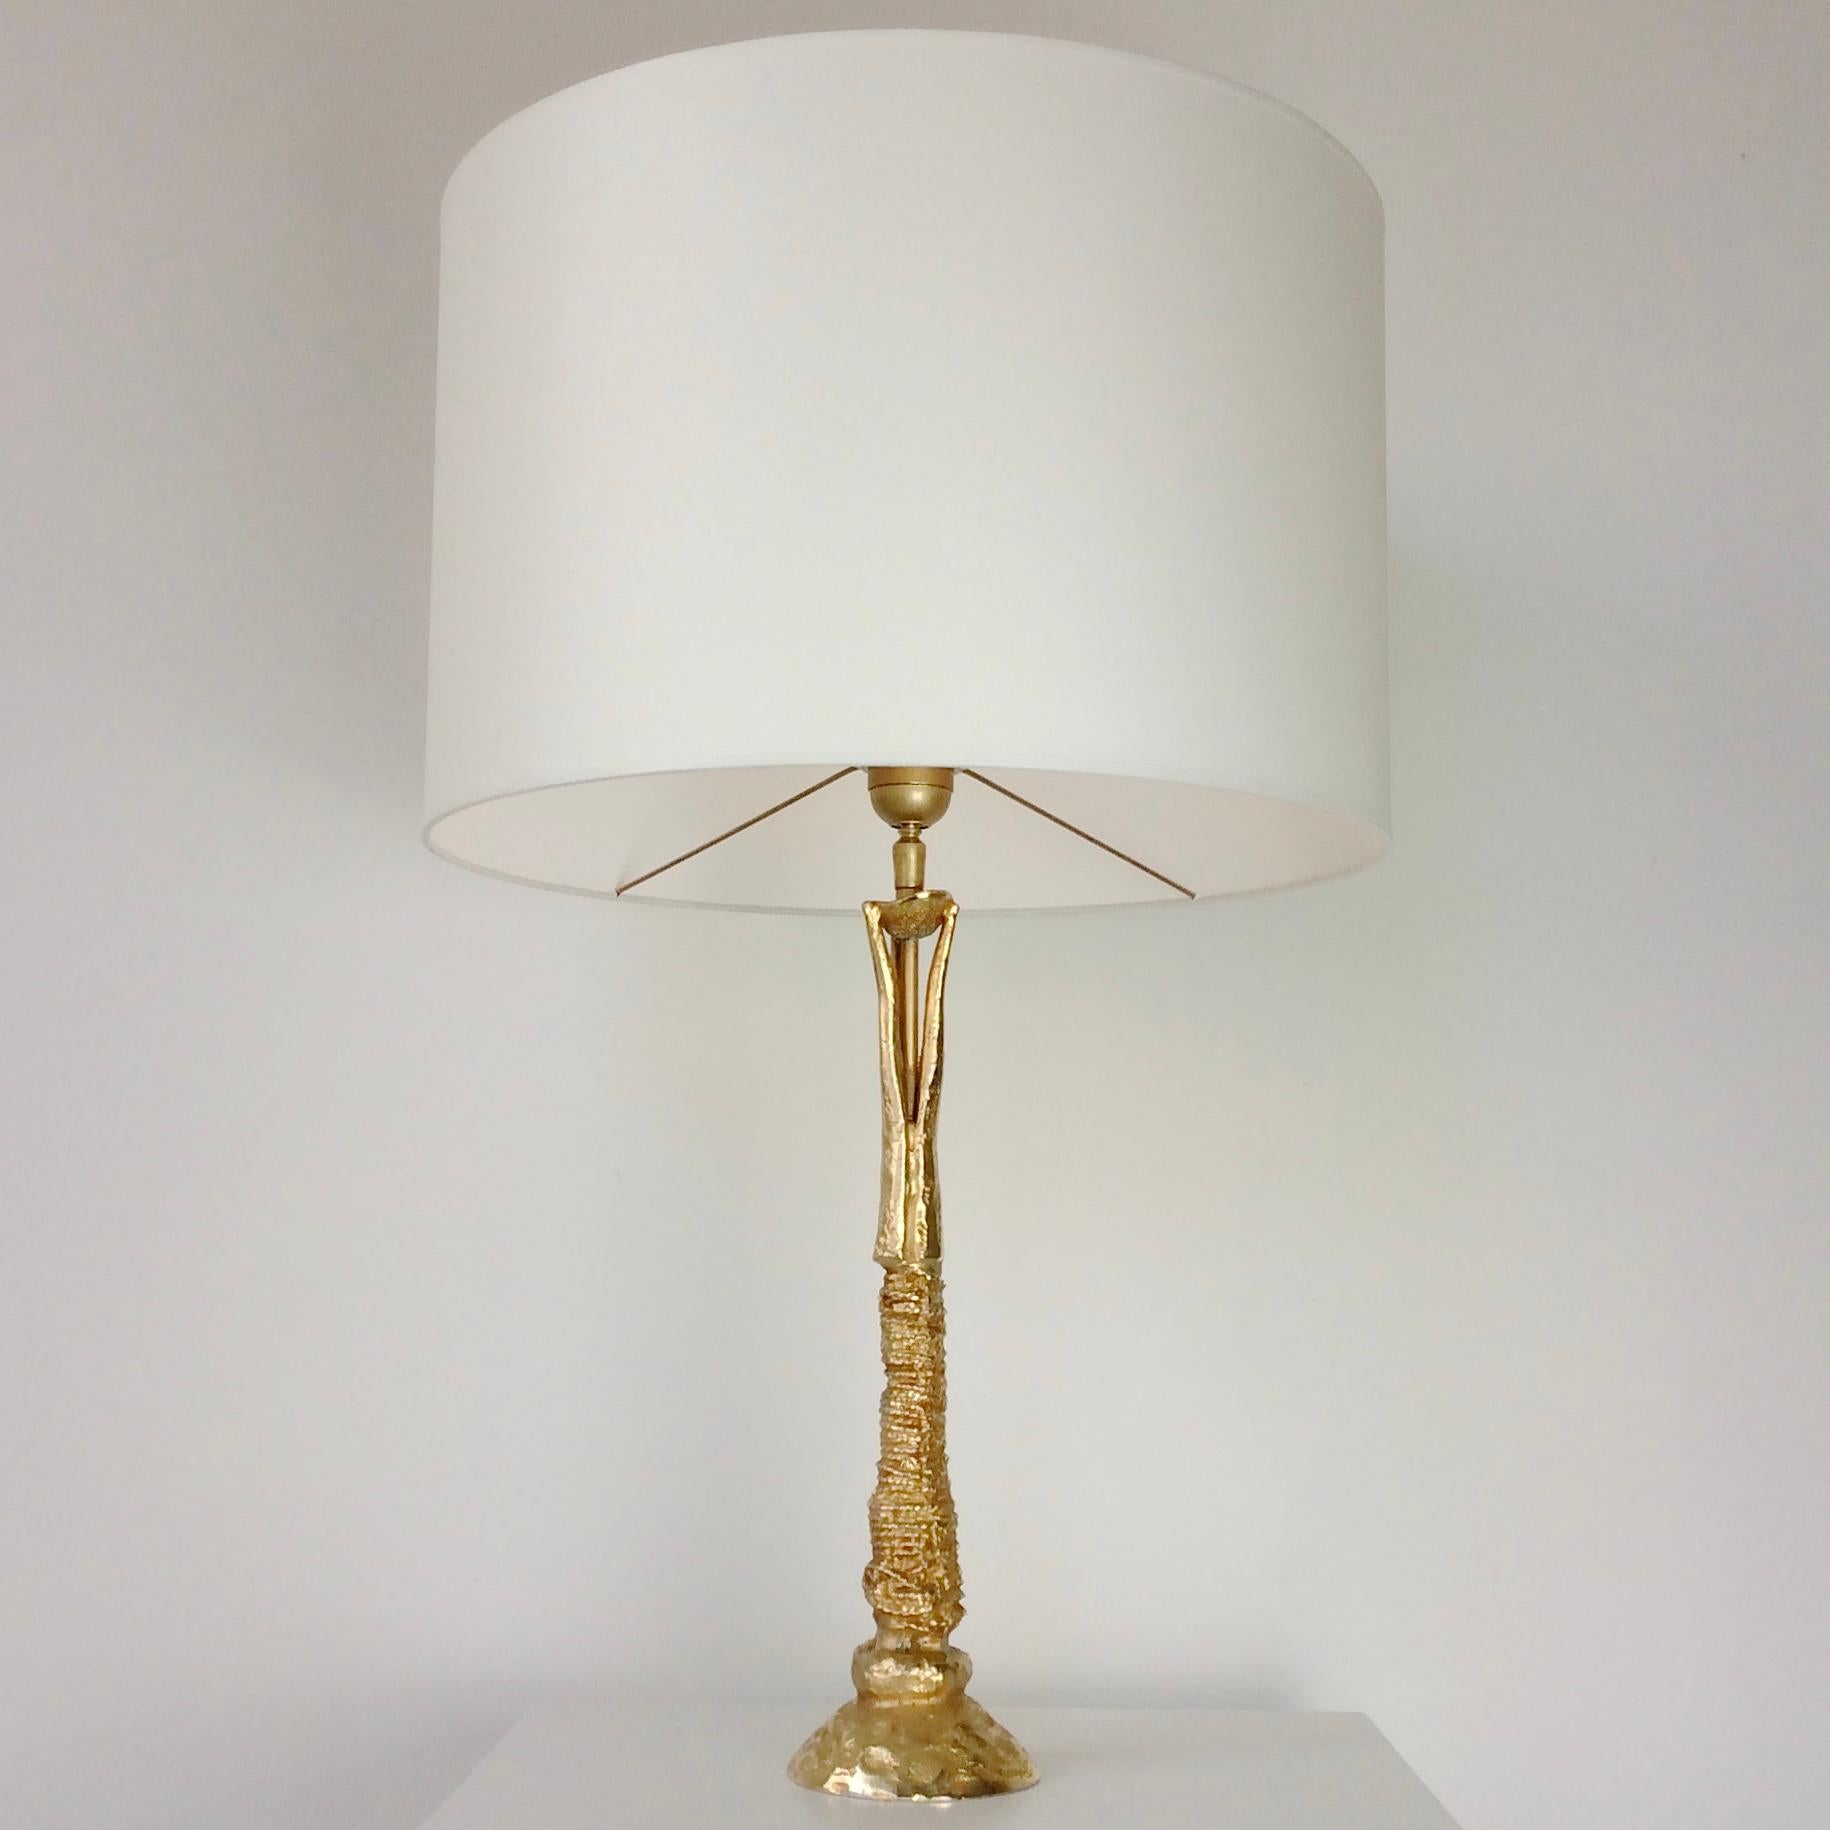 Bronze Table Lamp by Pierre Casenove for Fondica, circa 1990, France For Sale 3